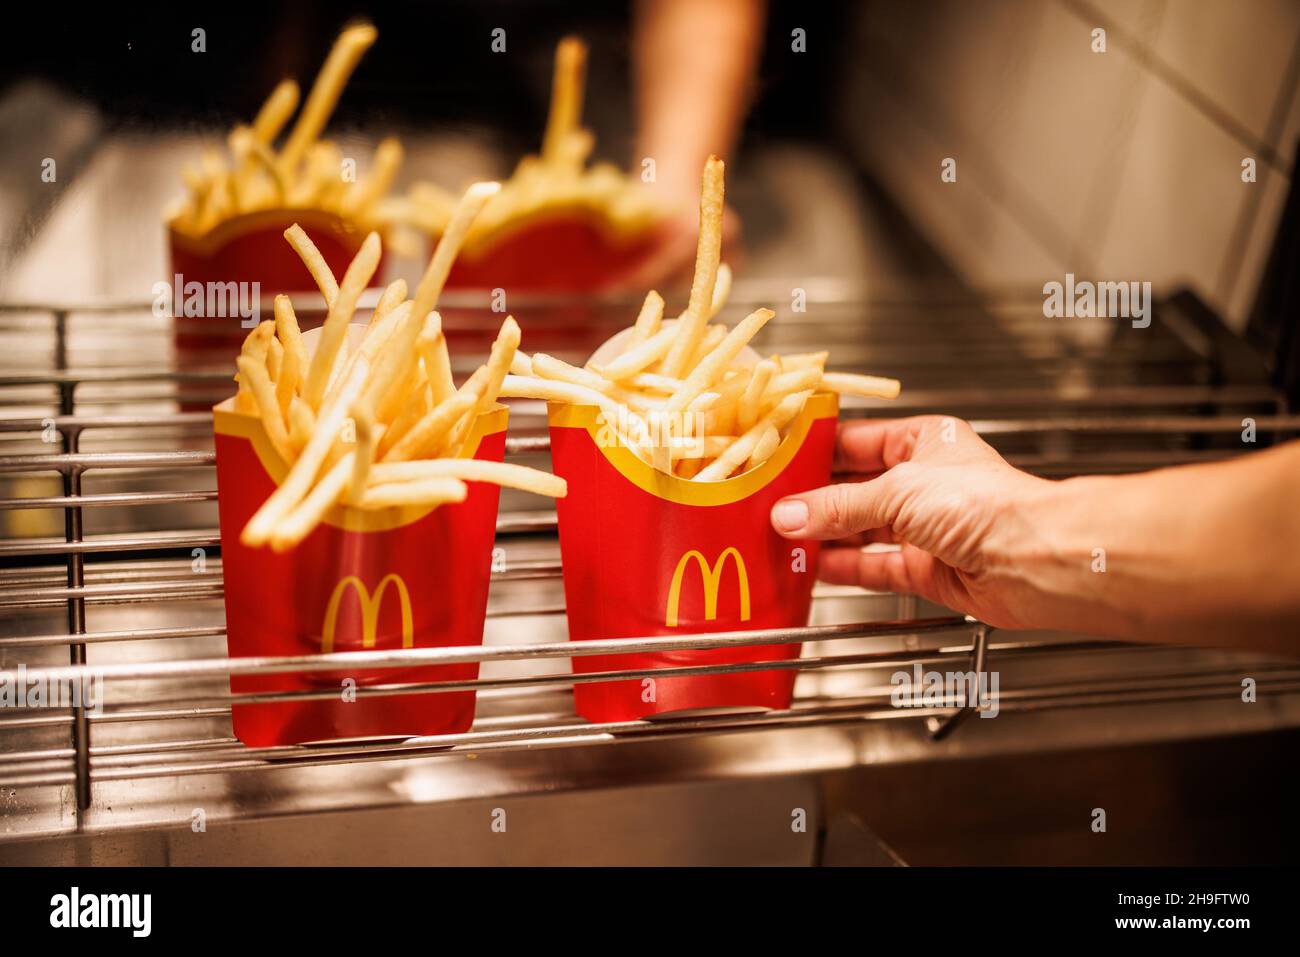 Munich, Germany. 02nd Dec, 2021. An employee places a bag of French fries in a grid at a branch of the McDonald's fast food chain on Martin-Luther-Strasse in Giesing. The branch opened its doors on 4 December 1971 as the first McDonald's branch in Germany. Credit: Matthias Balk/dpa/Alamy Live News Stock Photo